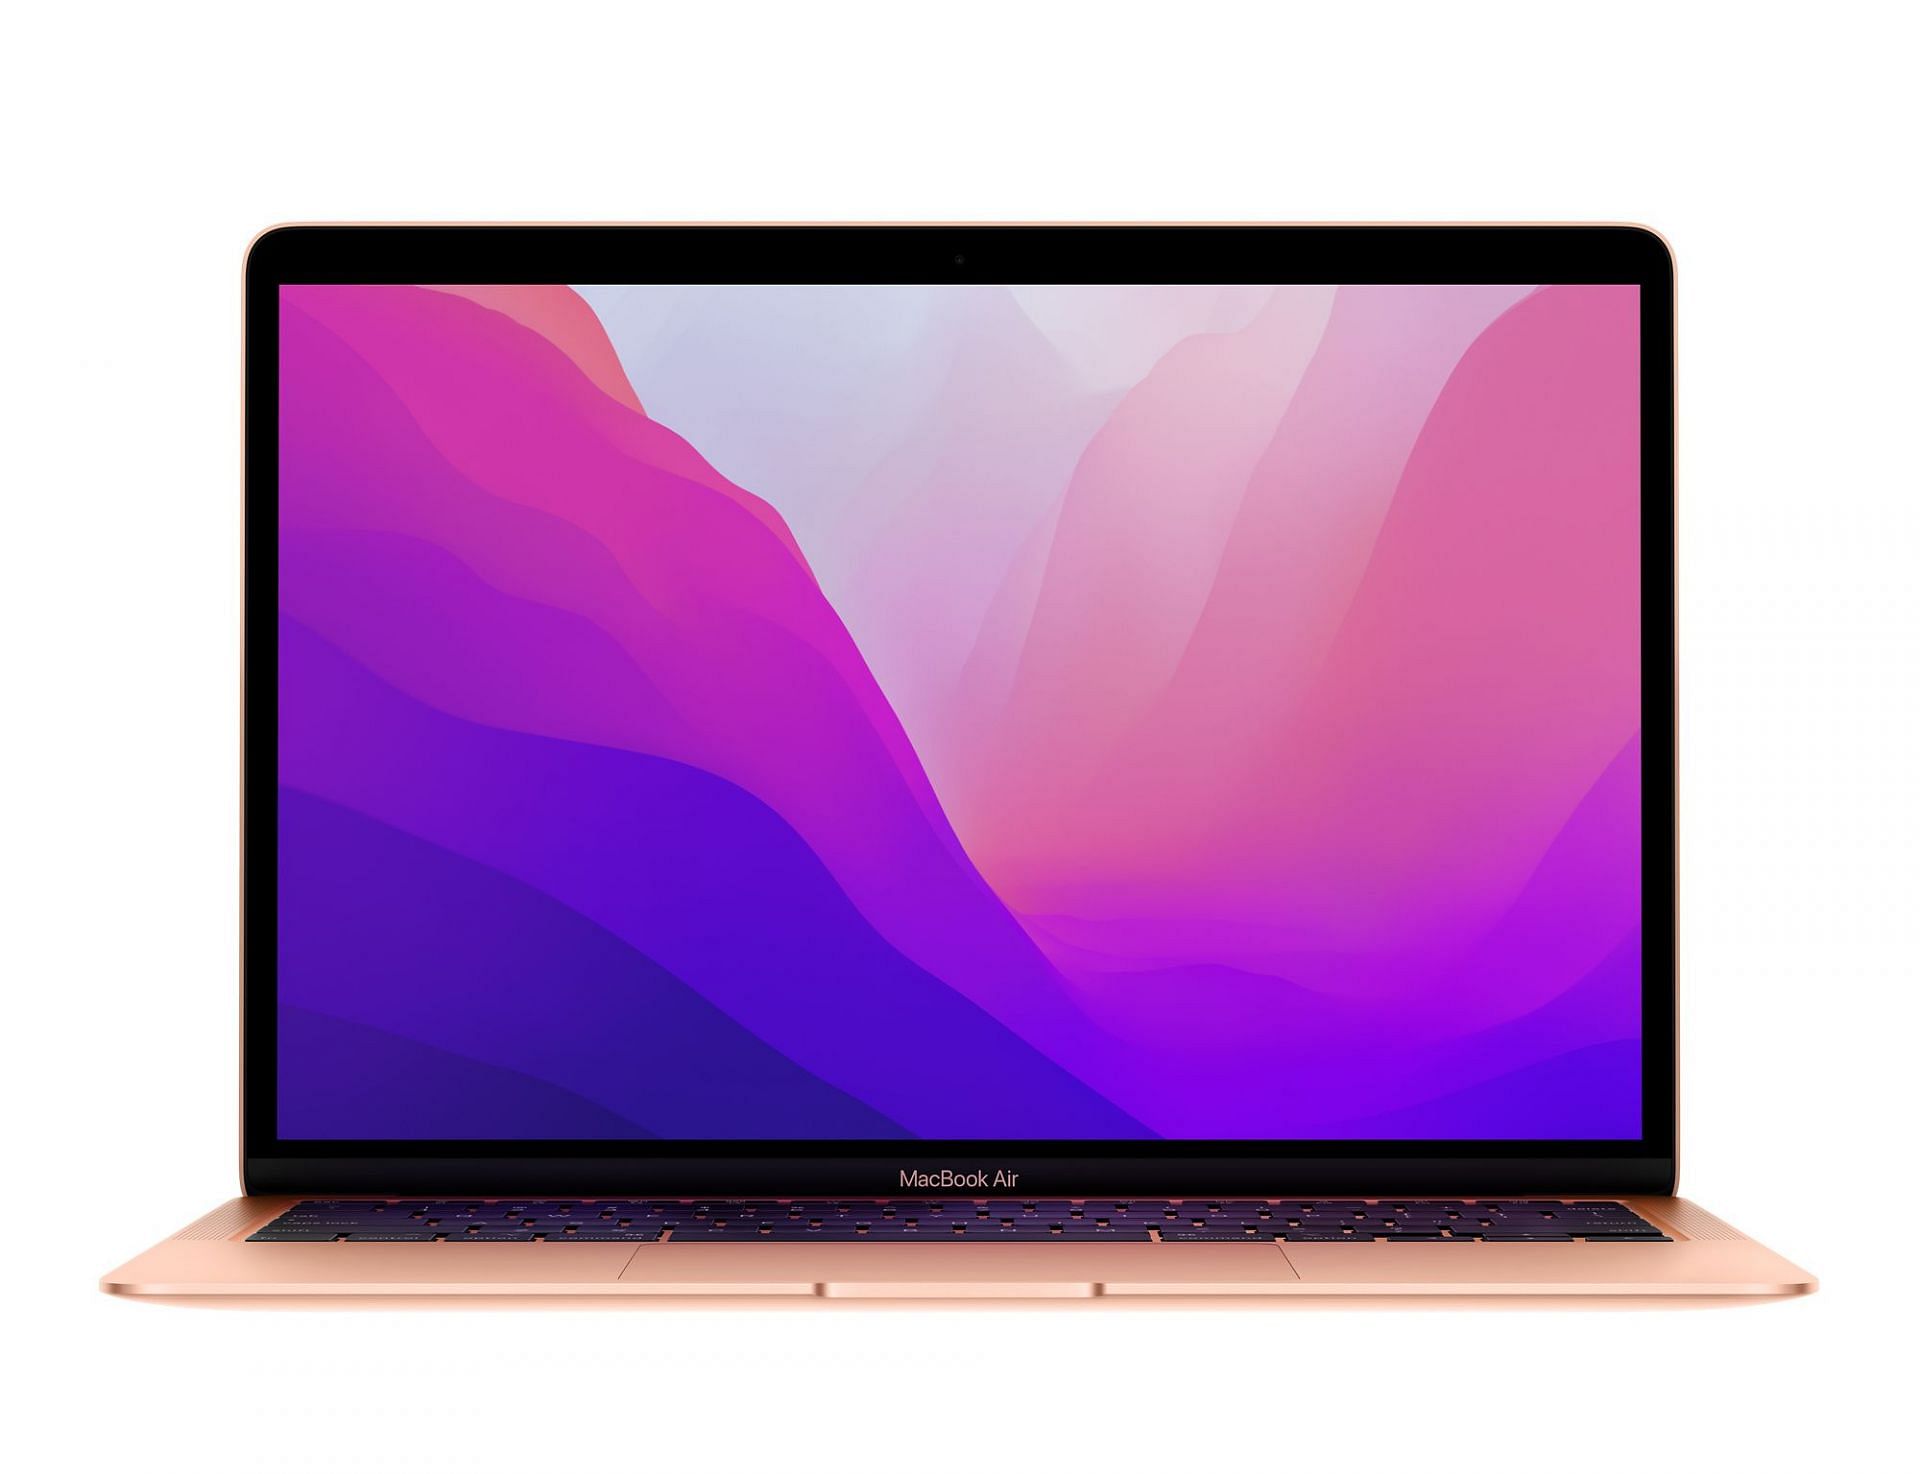 Is the M1 MacBook Air worth buying in 2022?